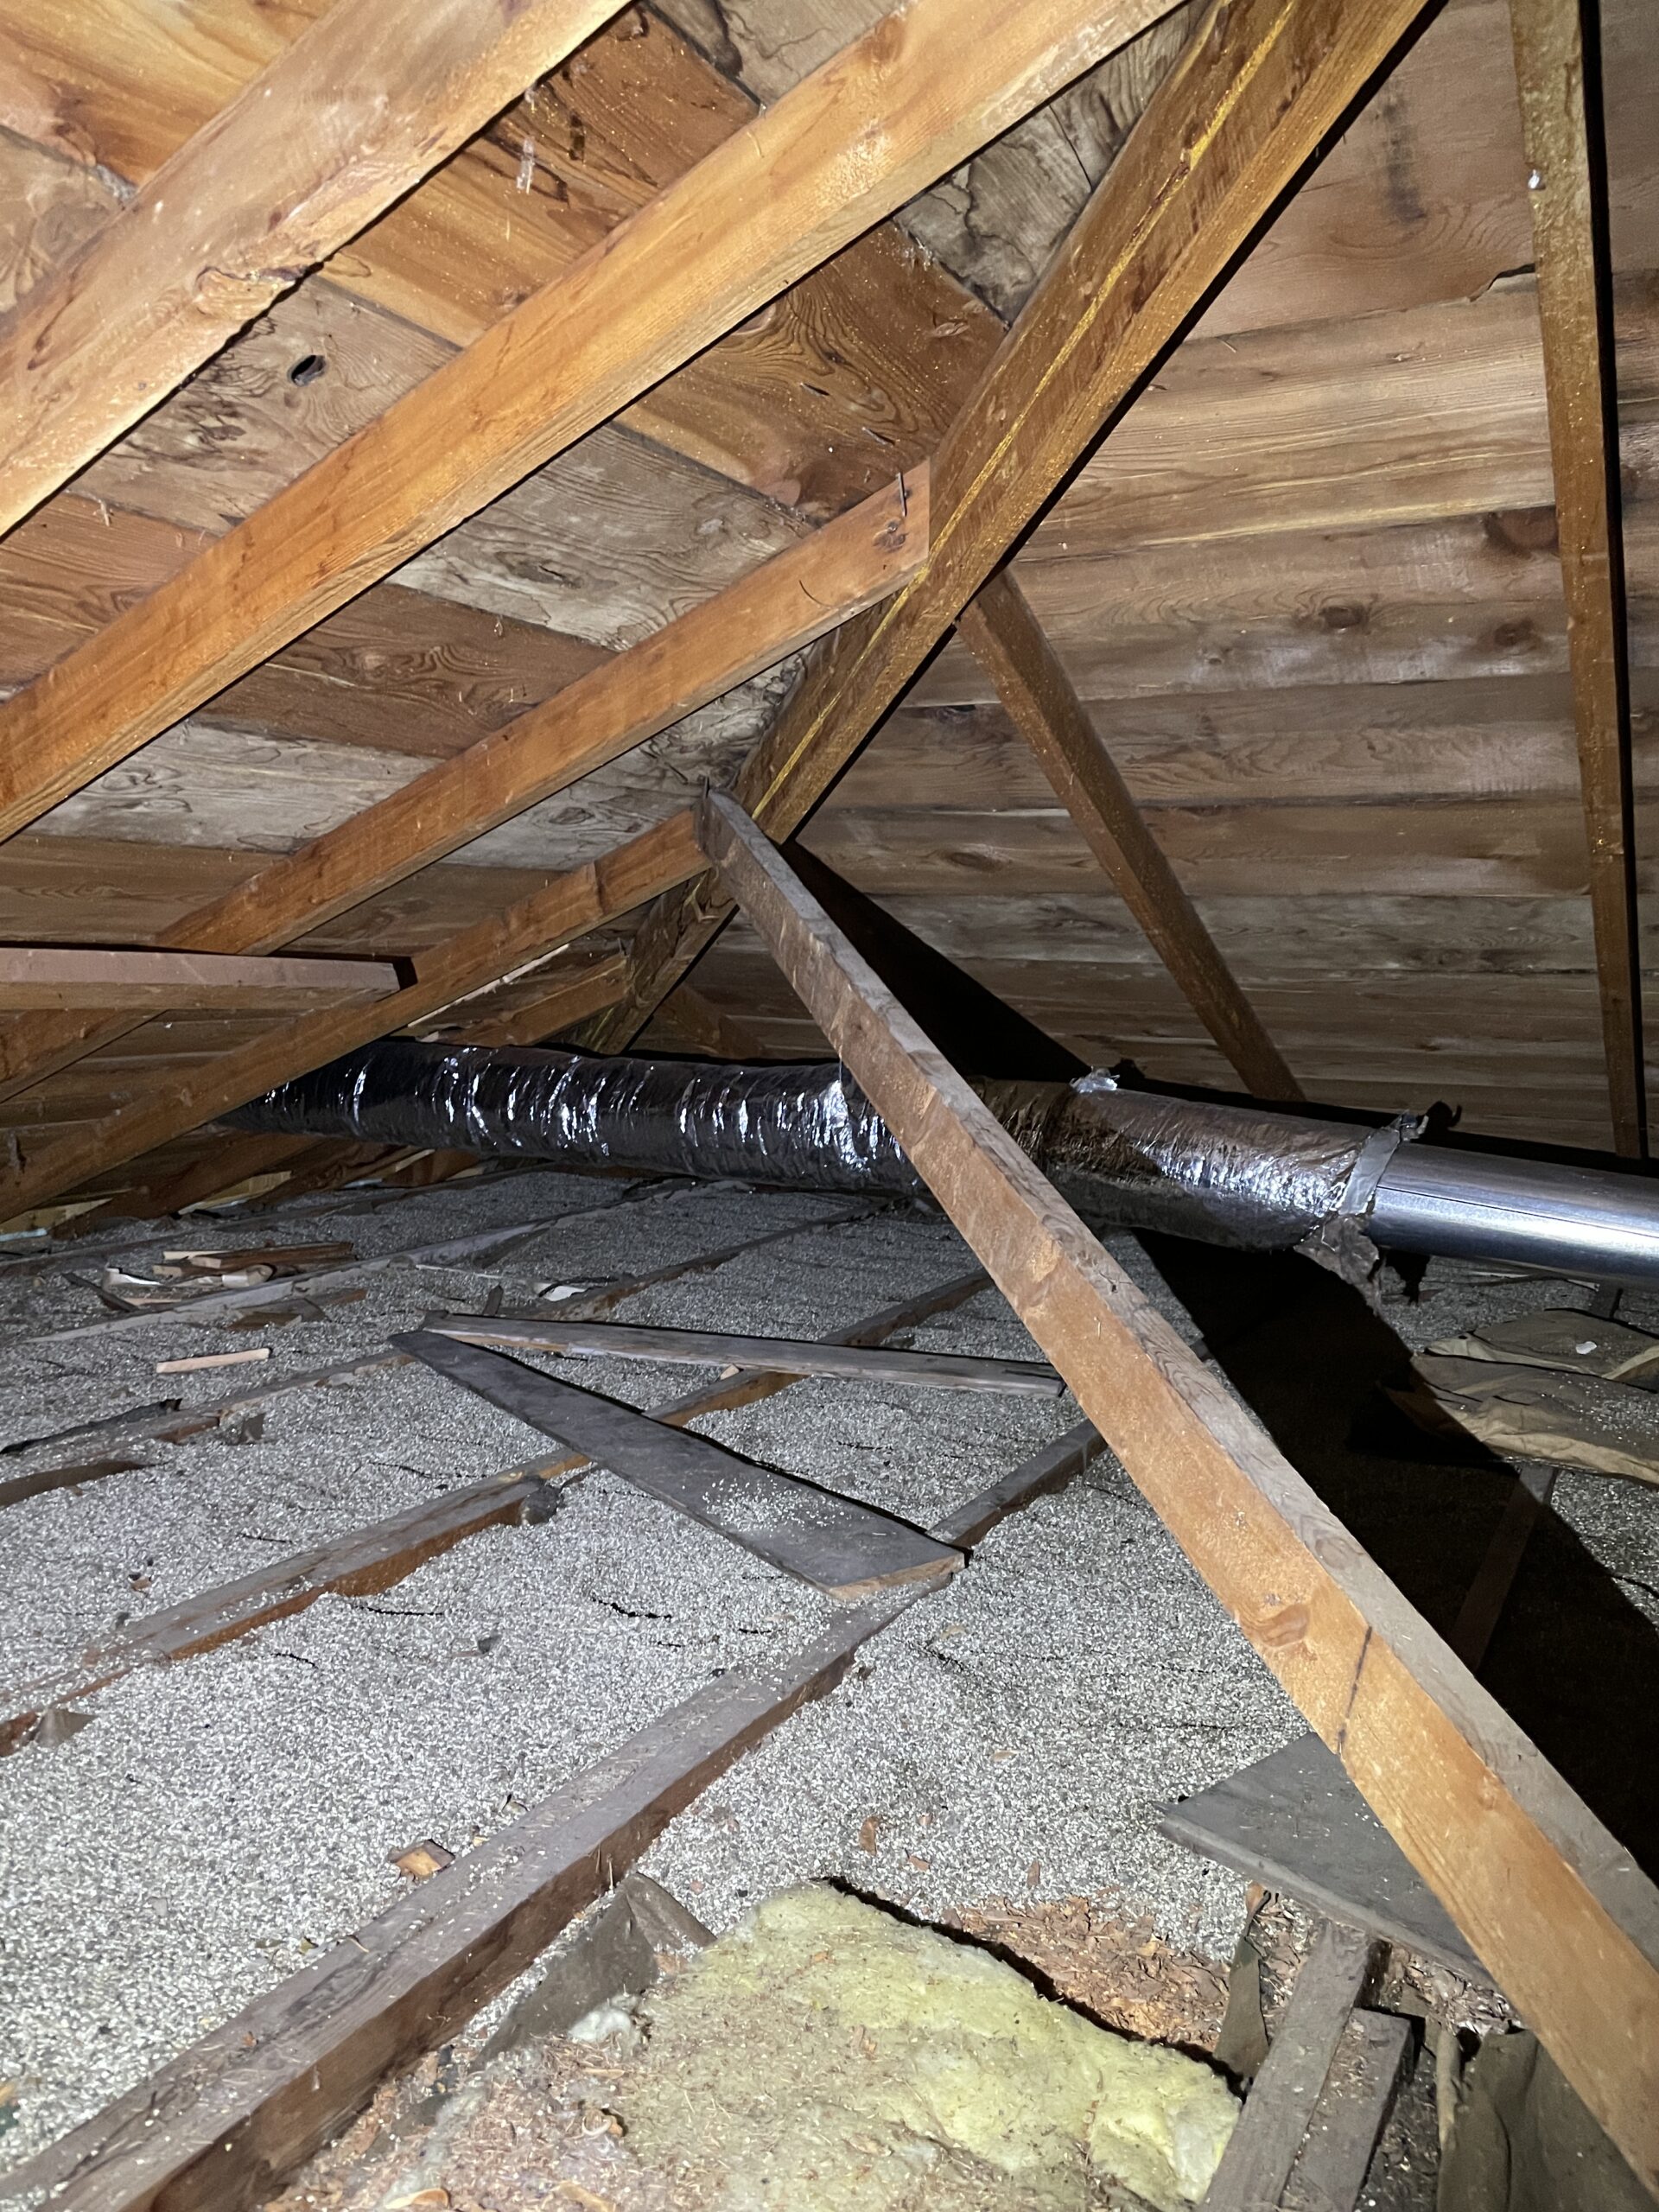 Vermiculite Insulation and Asbestos: What Homeowners Need to Know